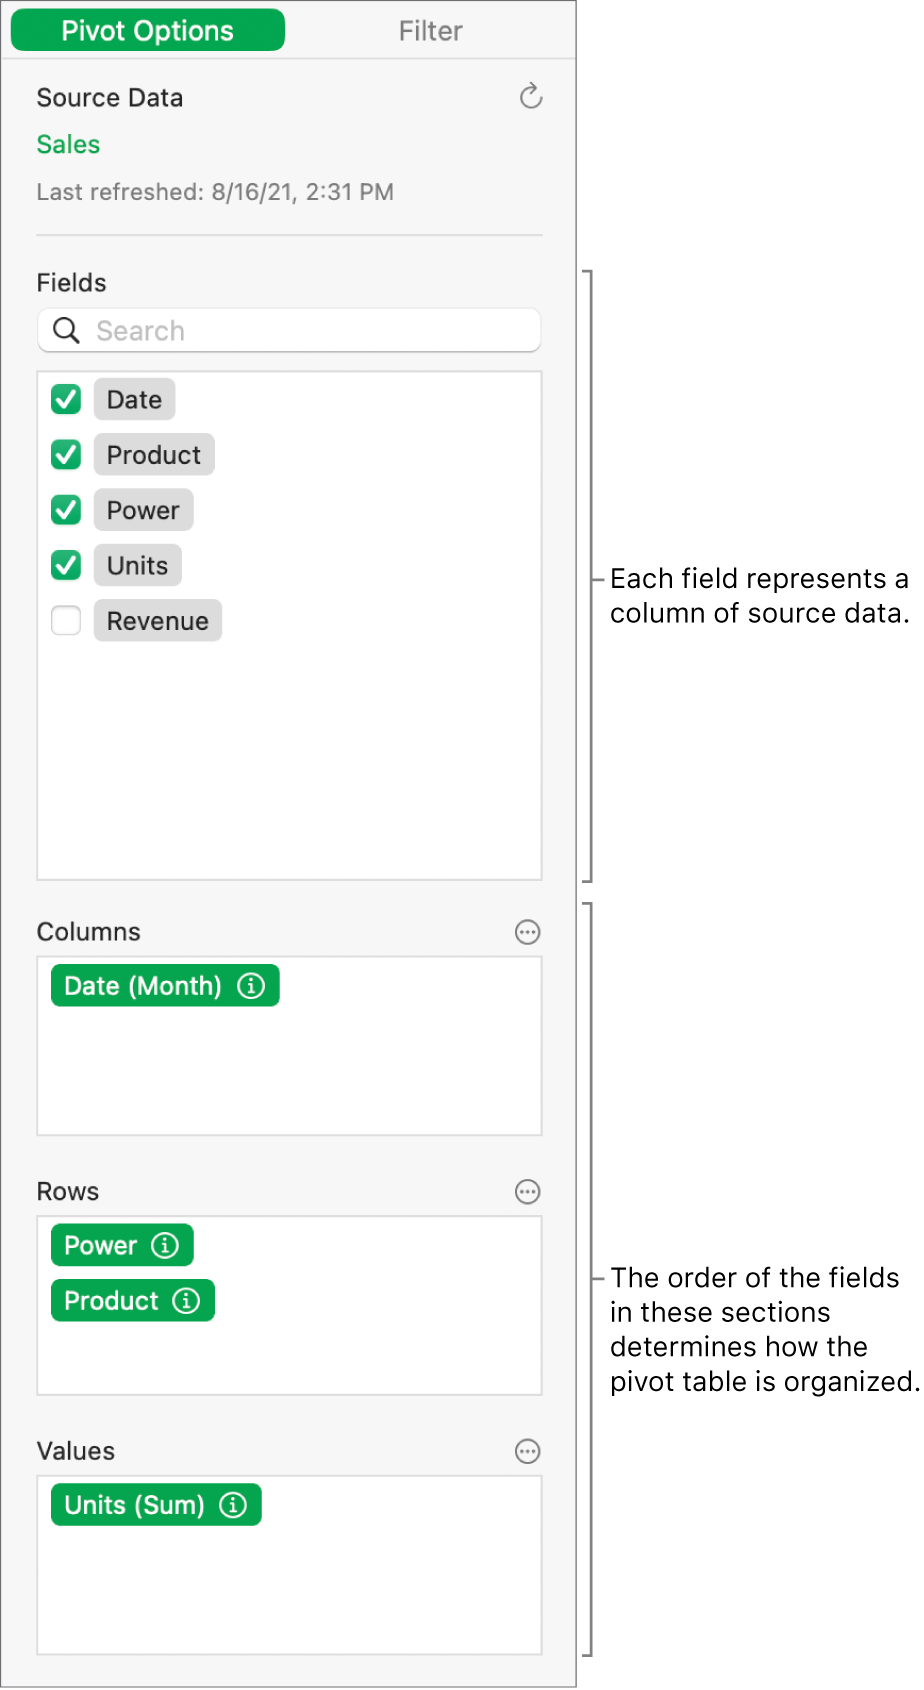 The Pivot Options menu showing fields in the Columns, Rows, and Values sections, as well as controls to edit the fields and refresh the pivot table.